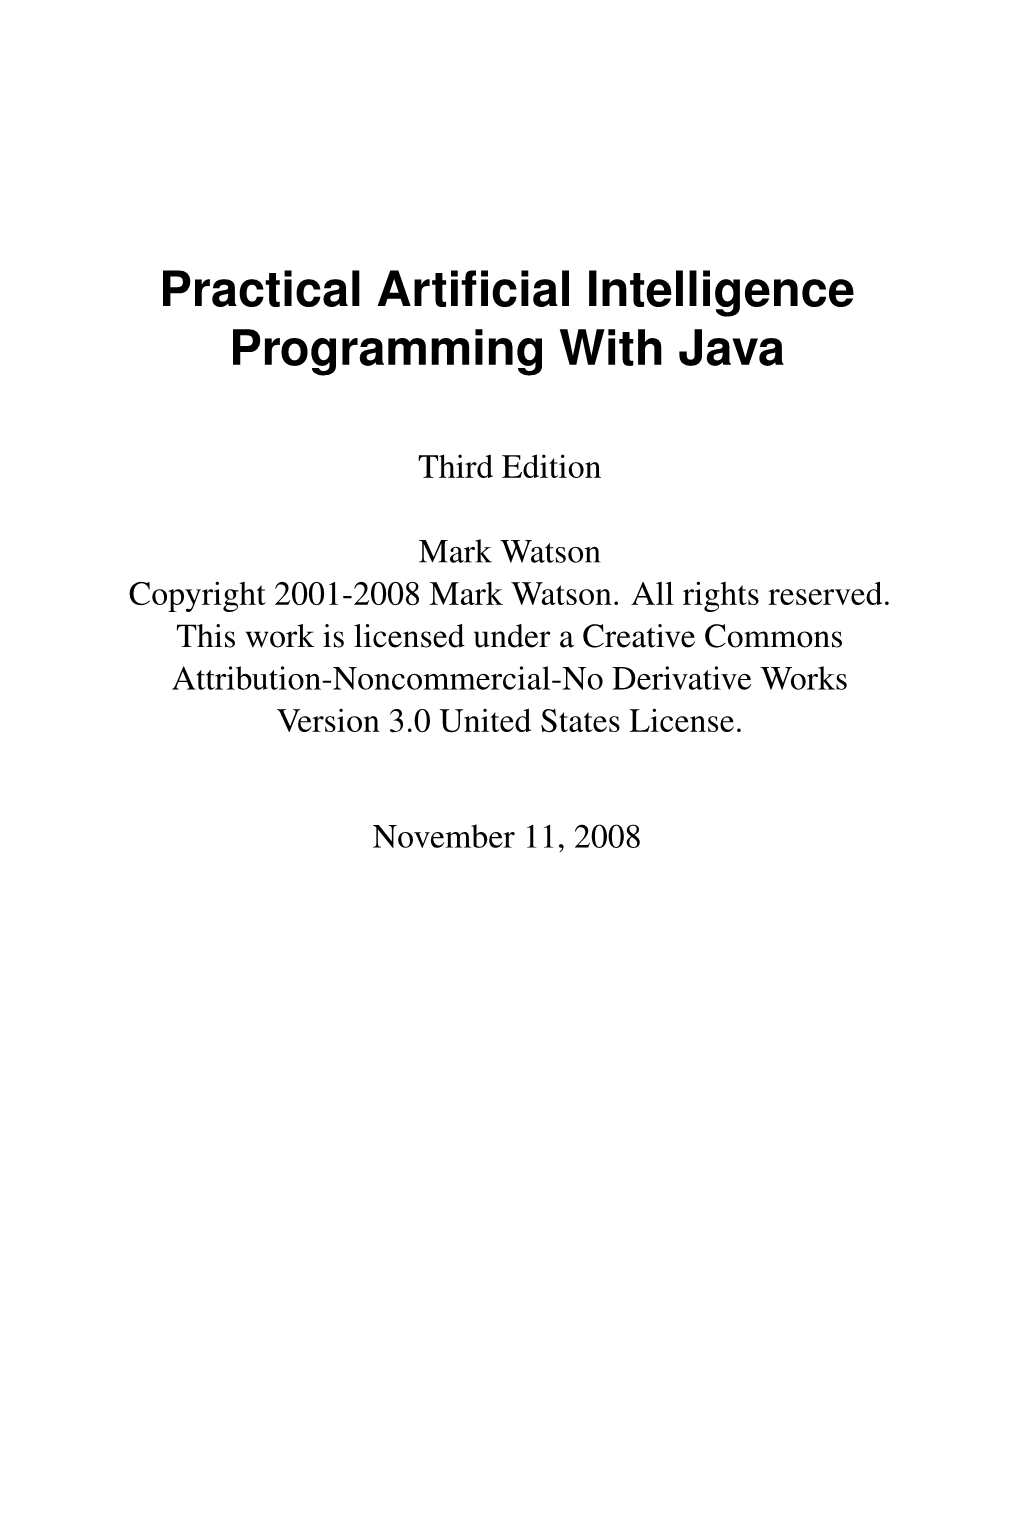 Practical Artificial Intelligence Programming with Java